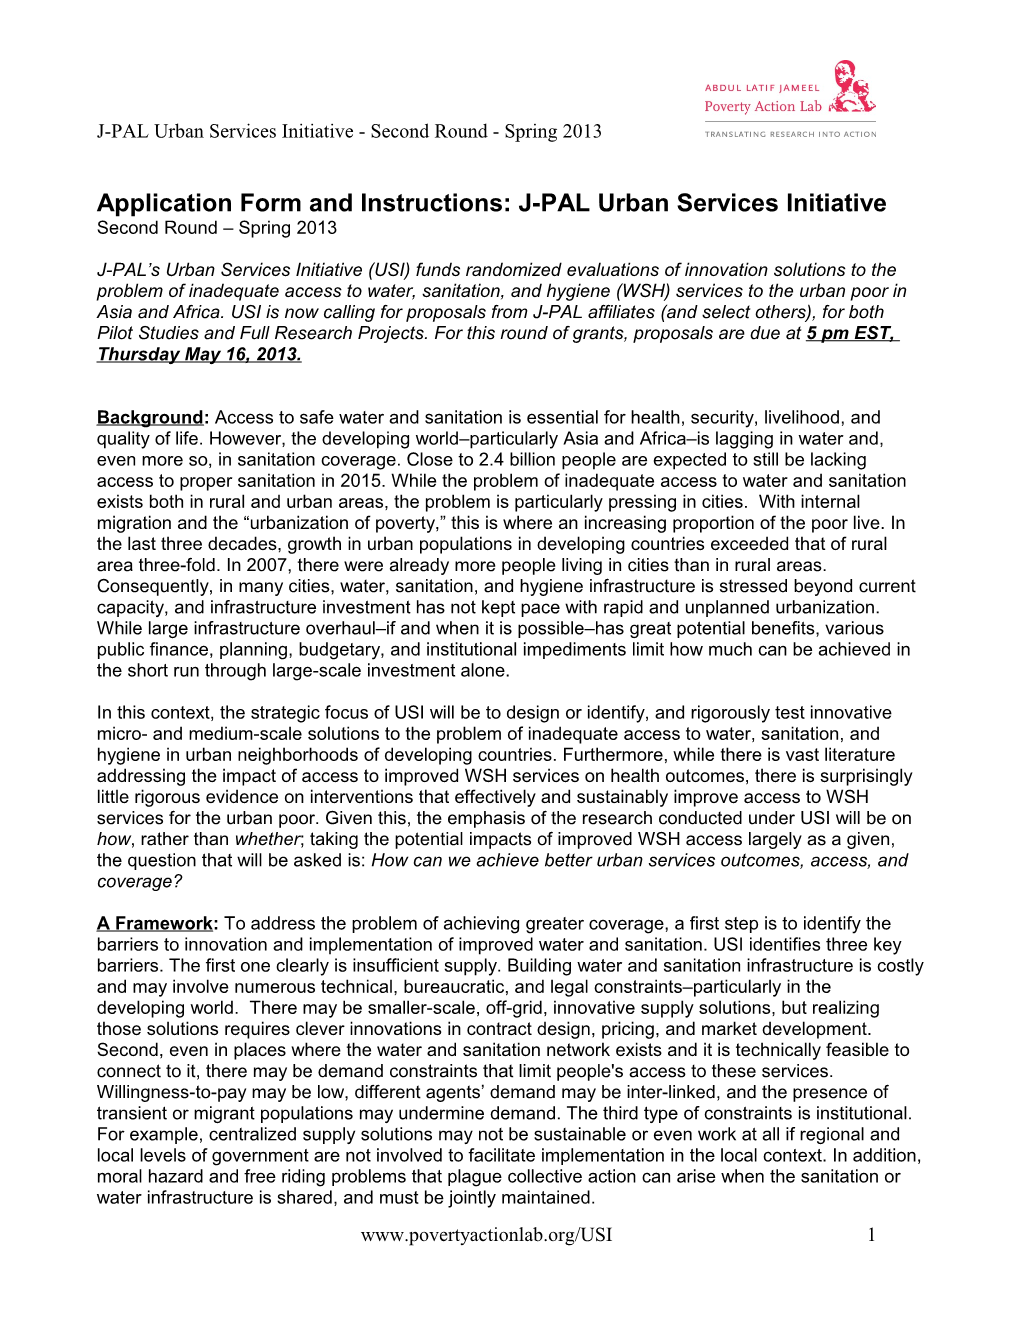 Application Form and Instructions: J-PAL Urban Services Initiative